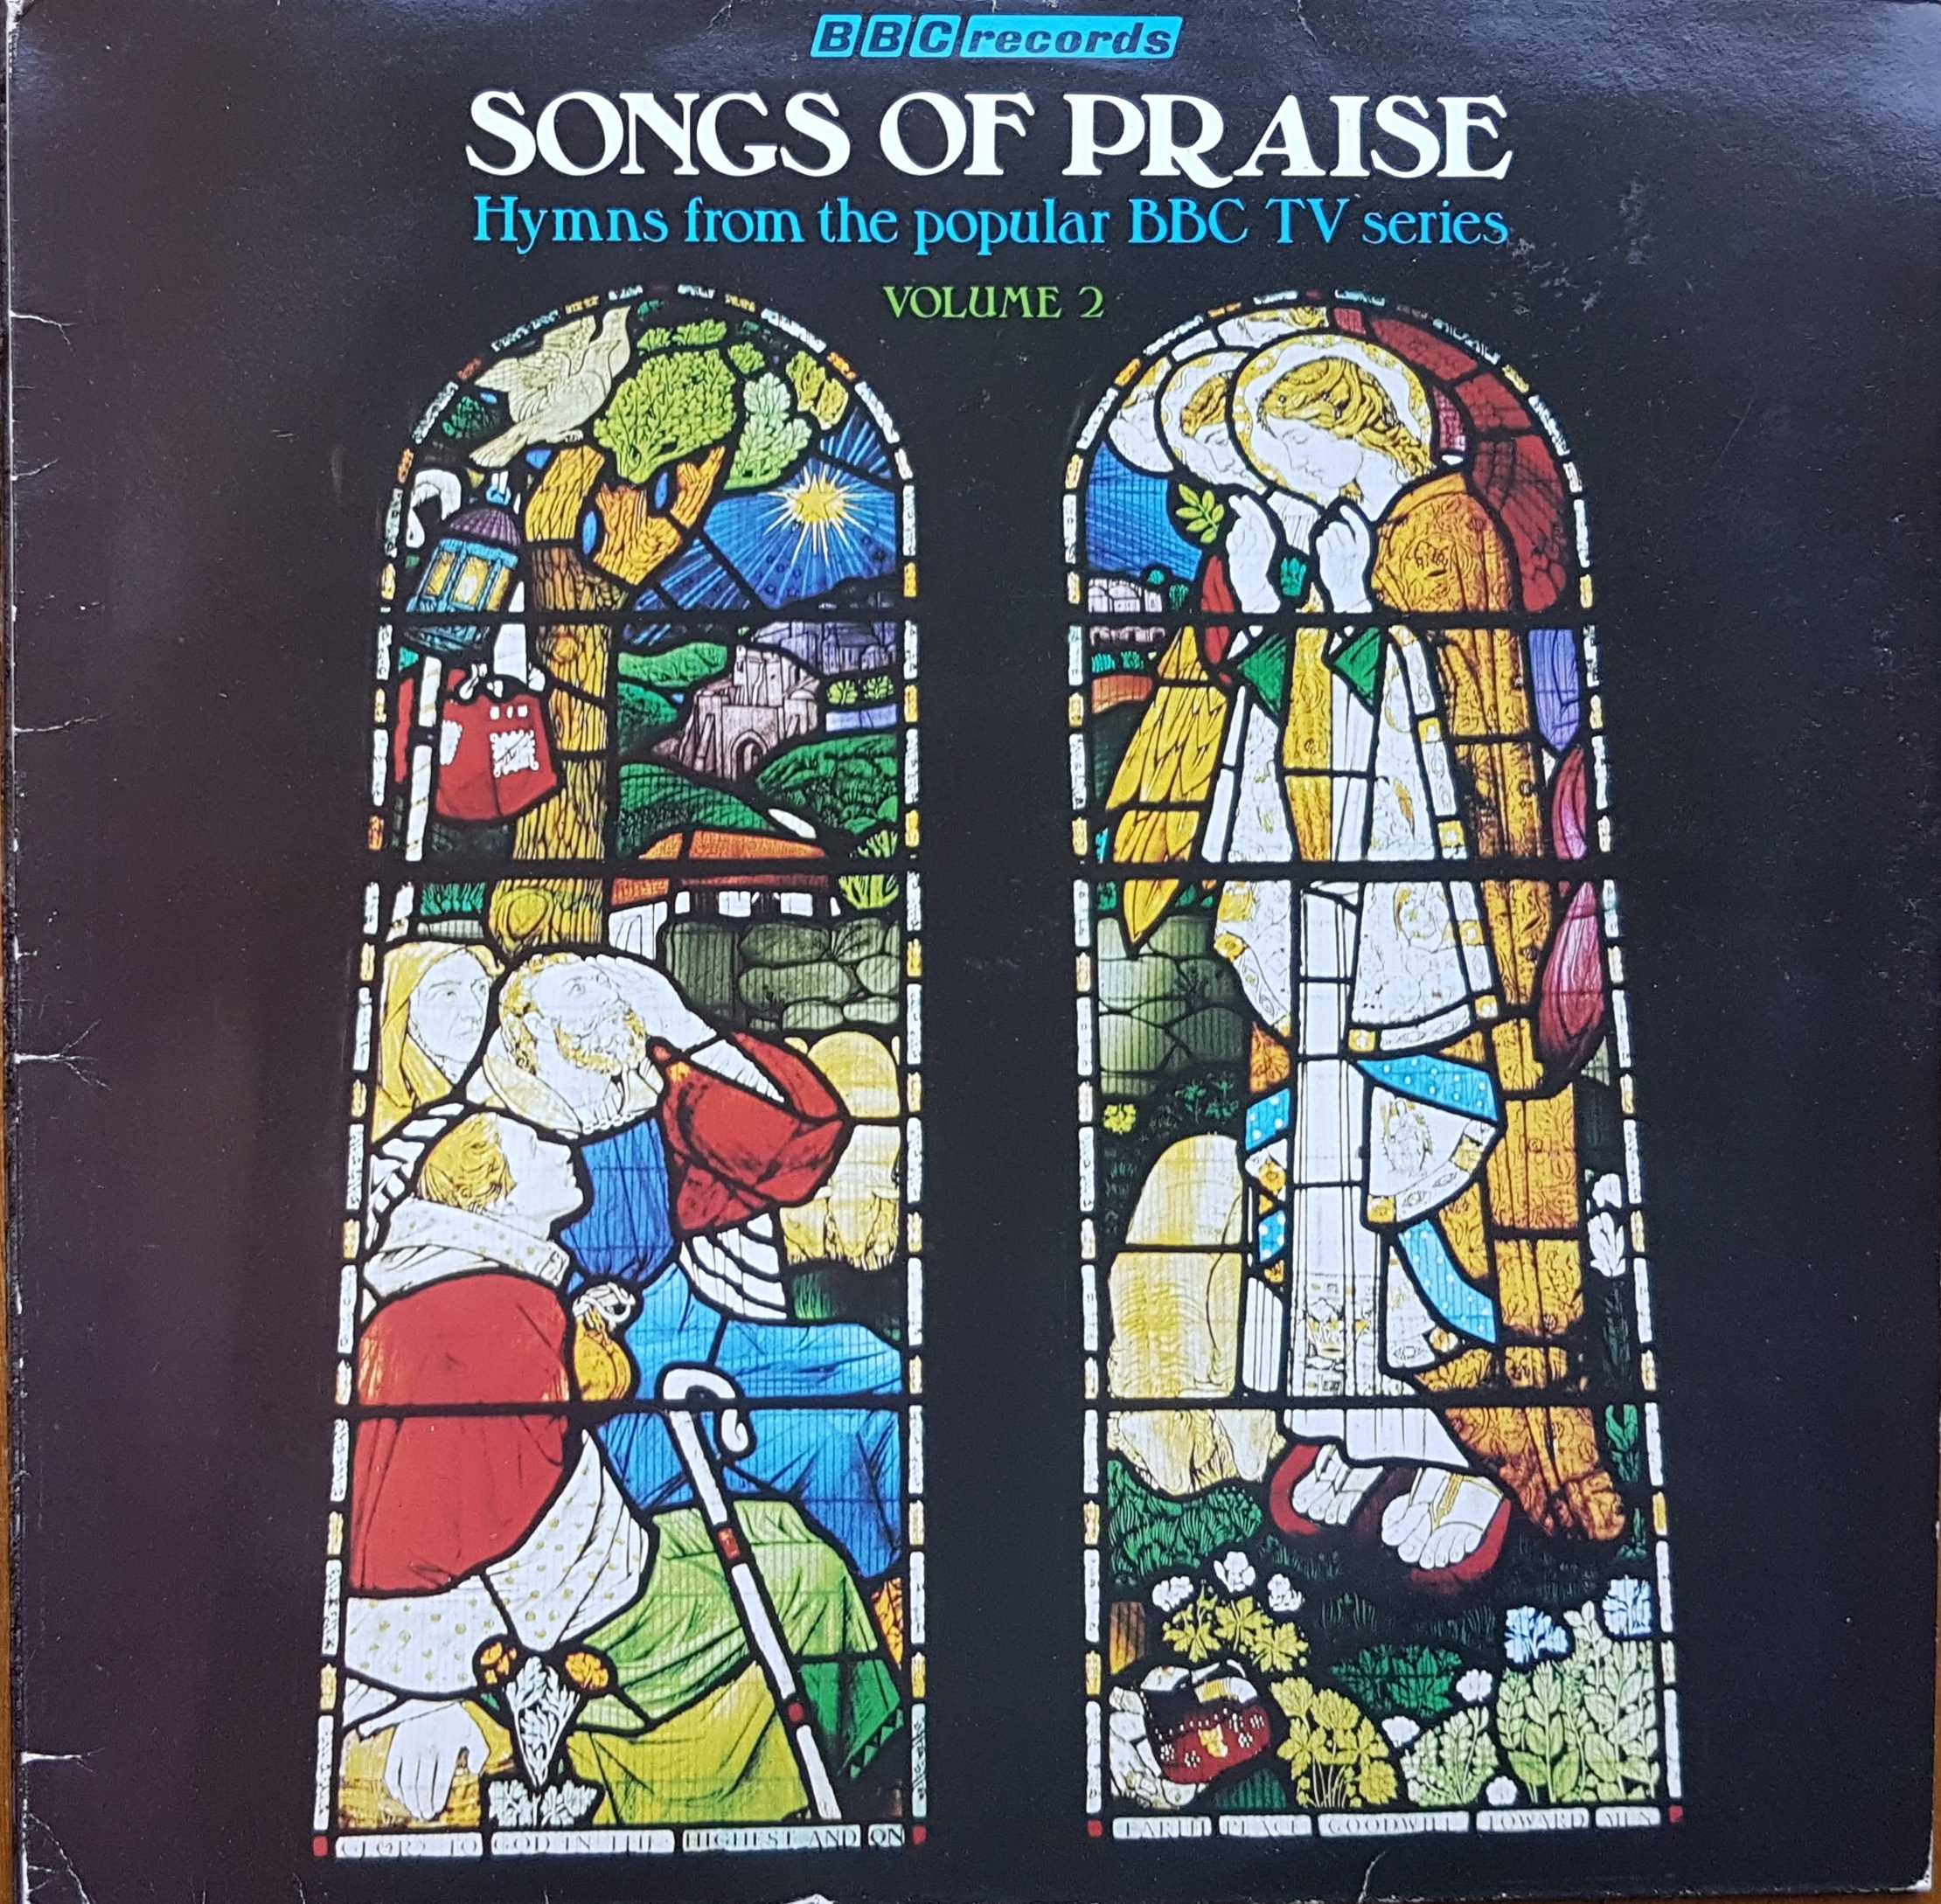 Picture of REC 338 Songs of praise - Volume 2 by artist Various from the BBC albums - Records and Tapes library